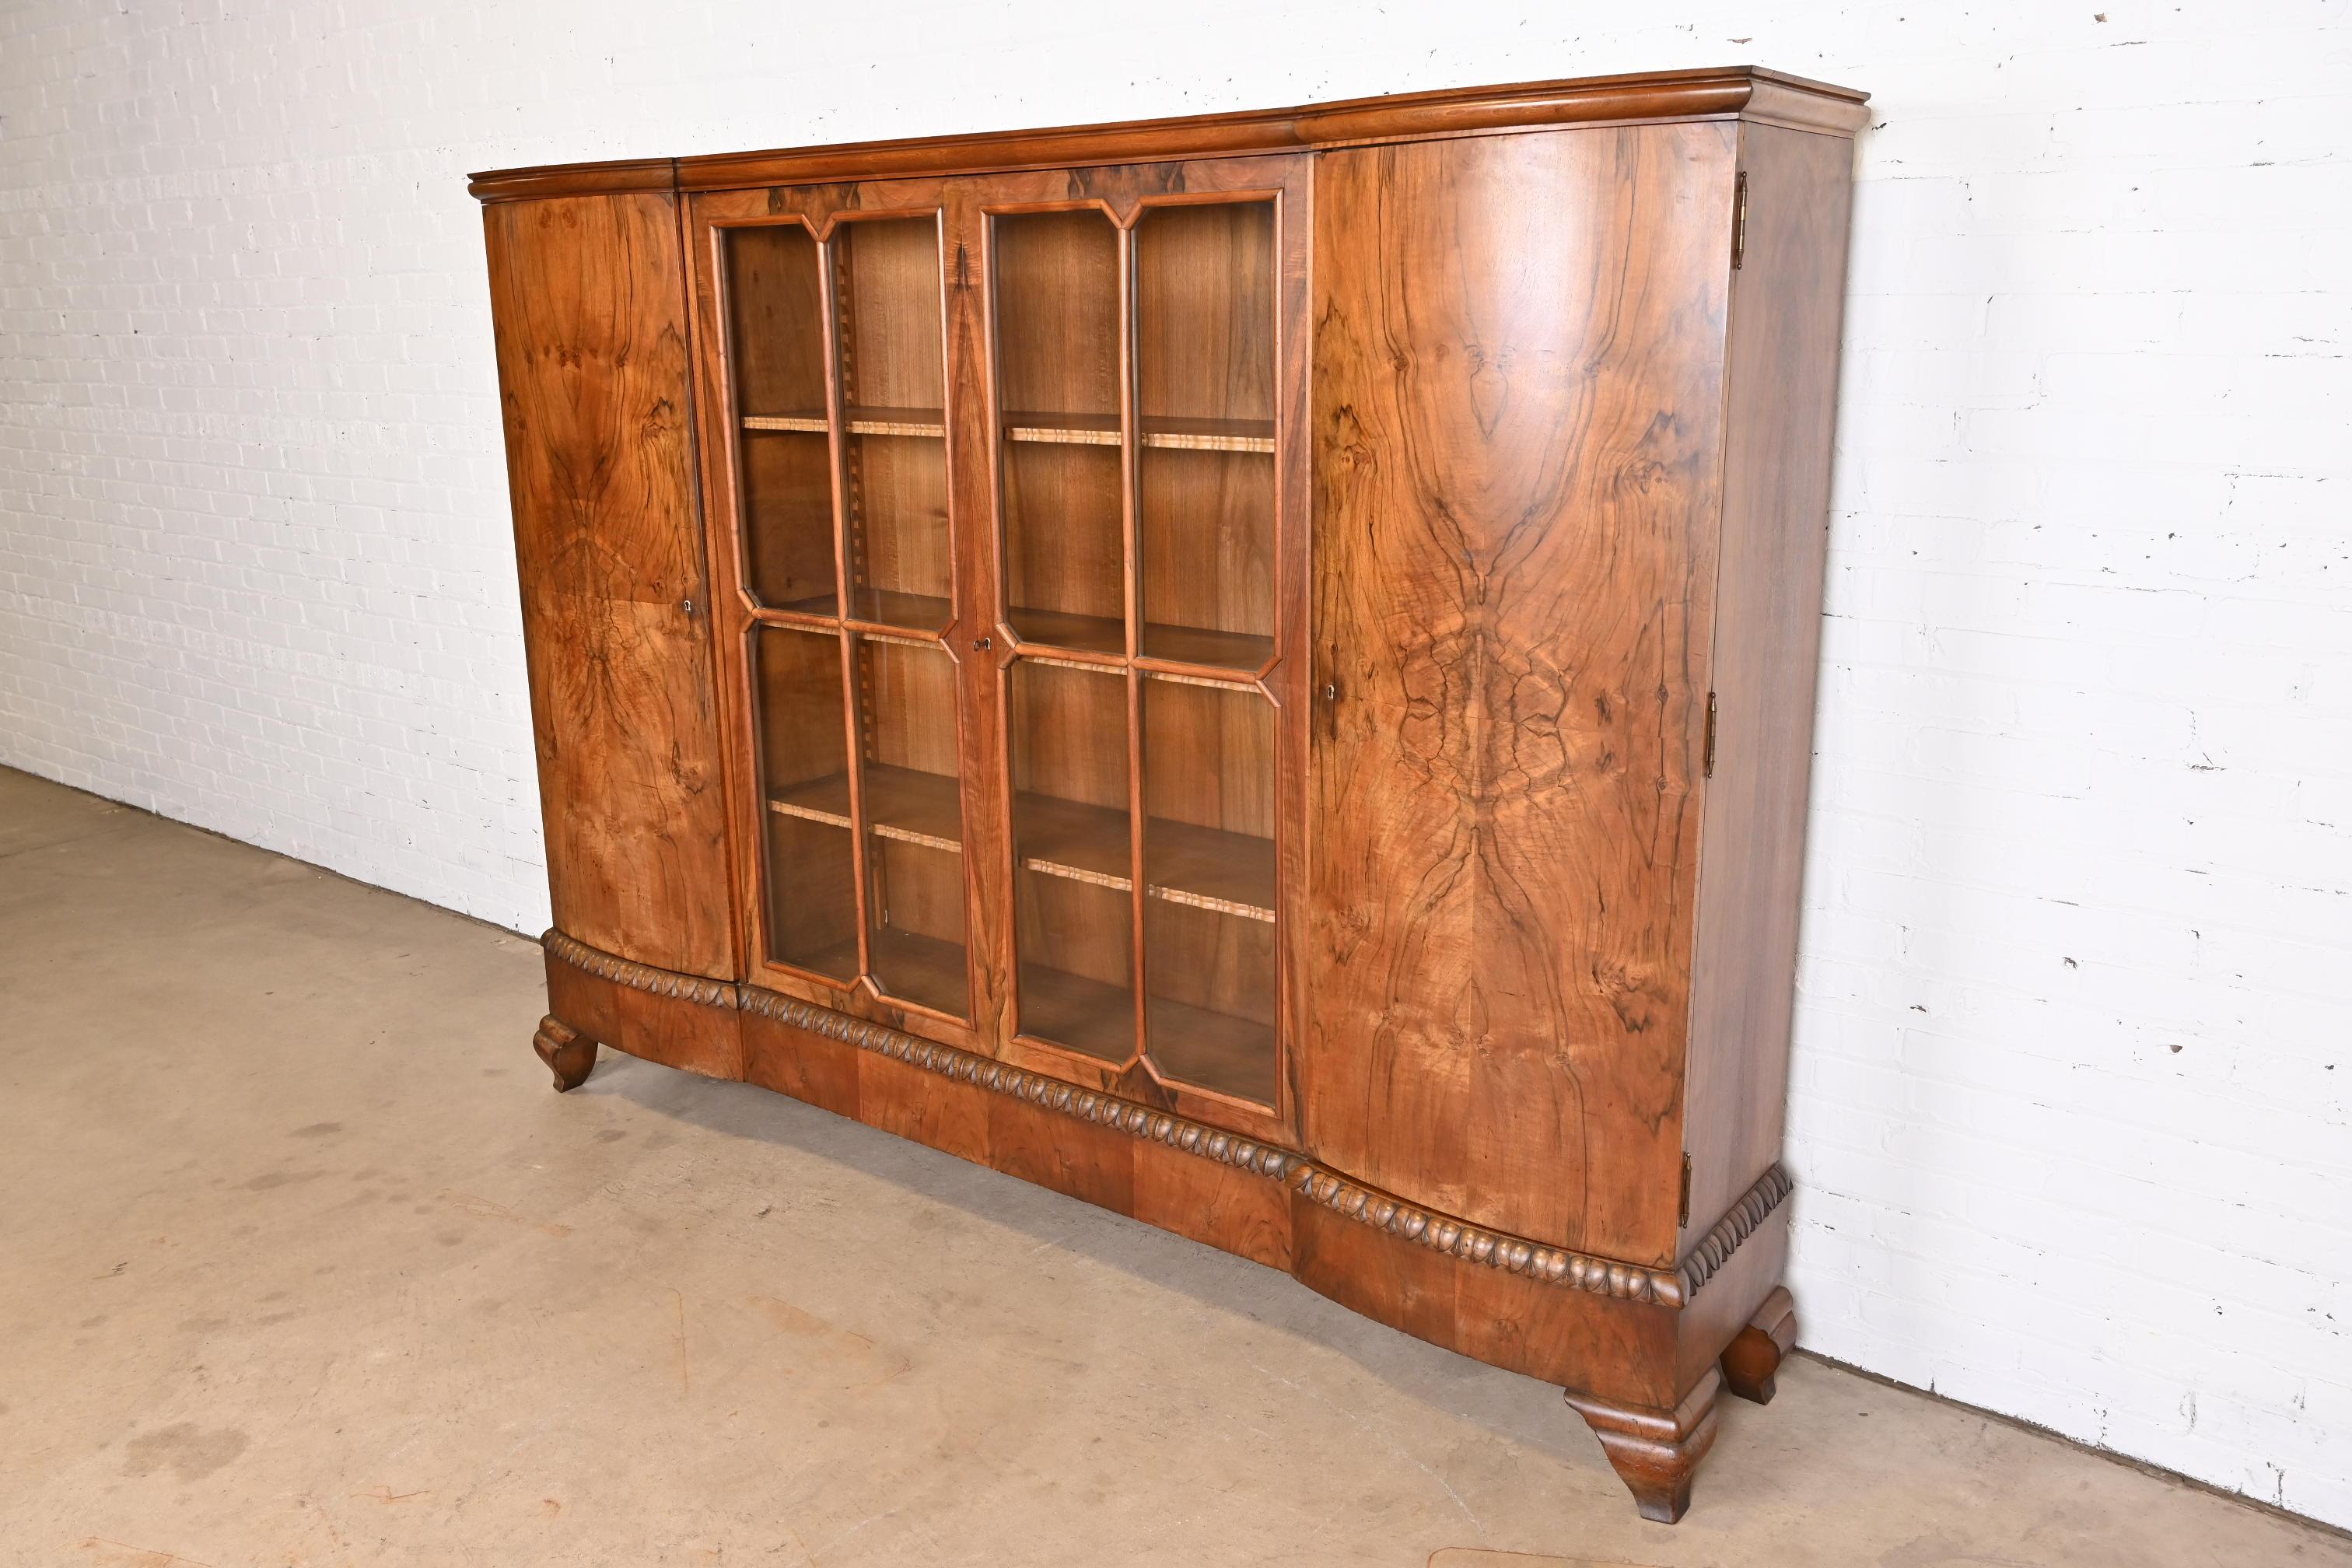 A stunning monumental French Art Deco knockdown bookcase or bar cabinet

In the manner of Jules Leleu

France, Early 20th century

Gorgeous book-matched burled walnut, with carved trim and mullioned glass front doors. Interior shelving is